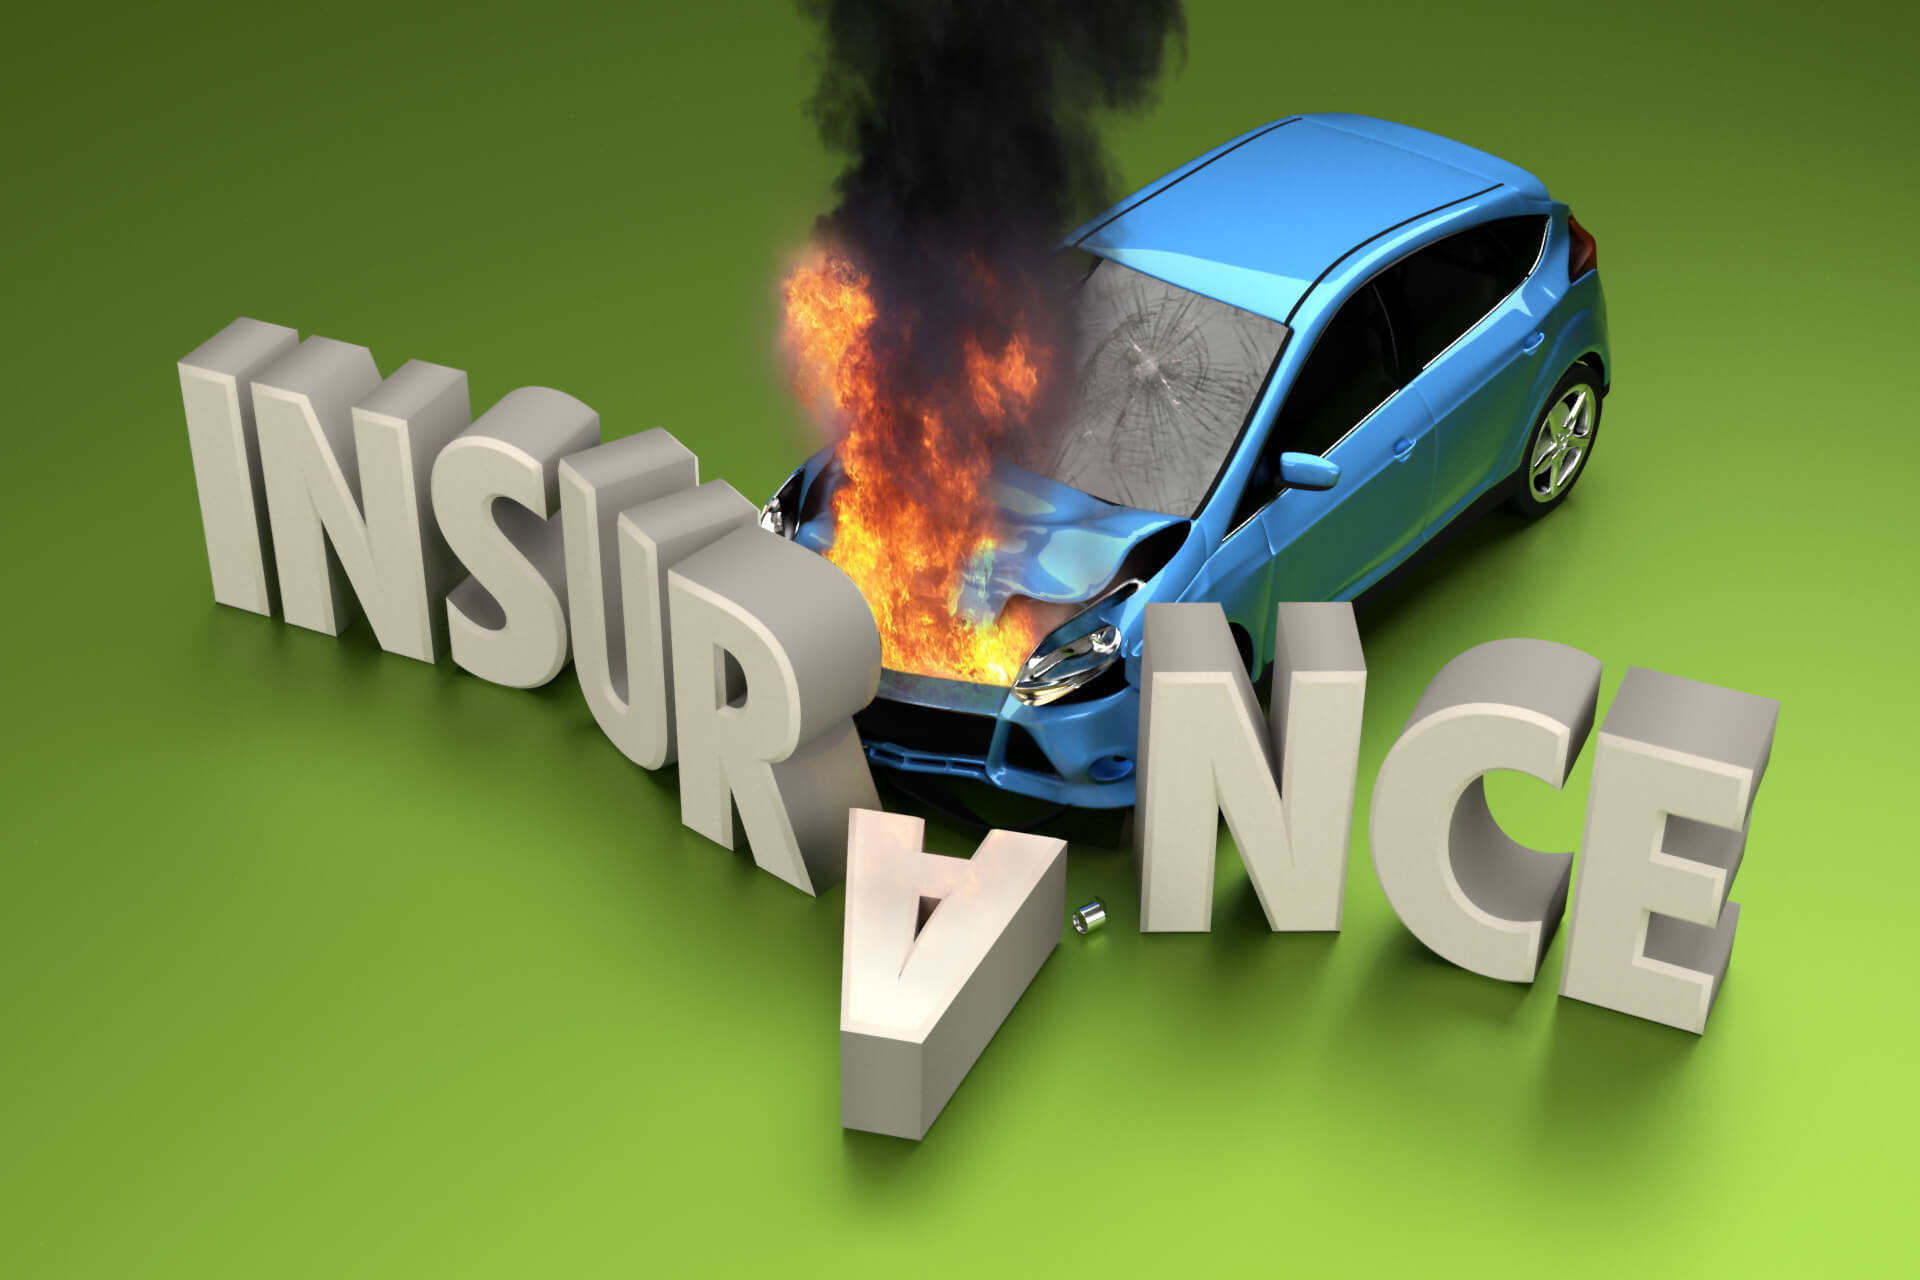 Car fire insurance claim concept free image download